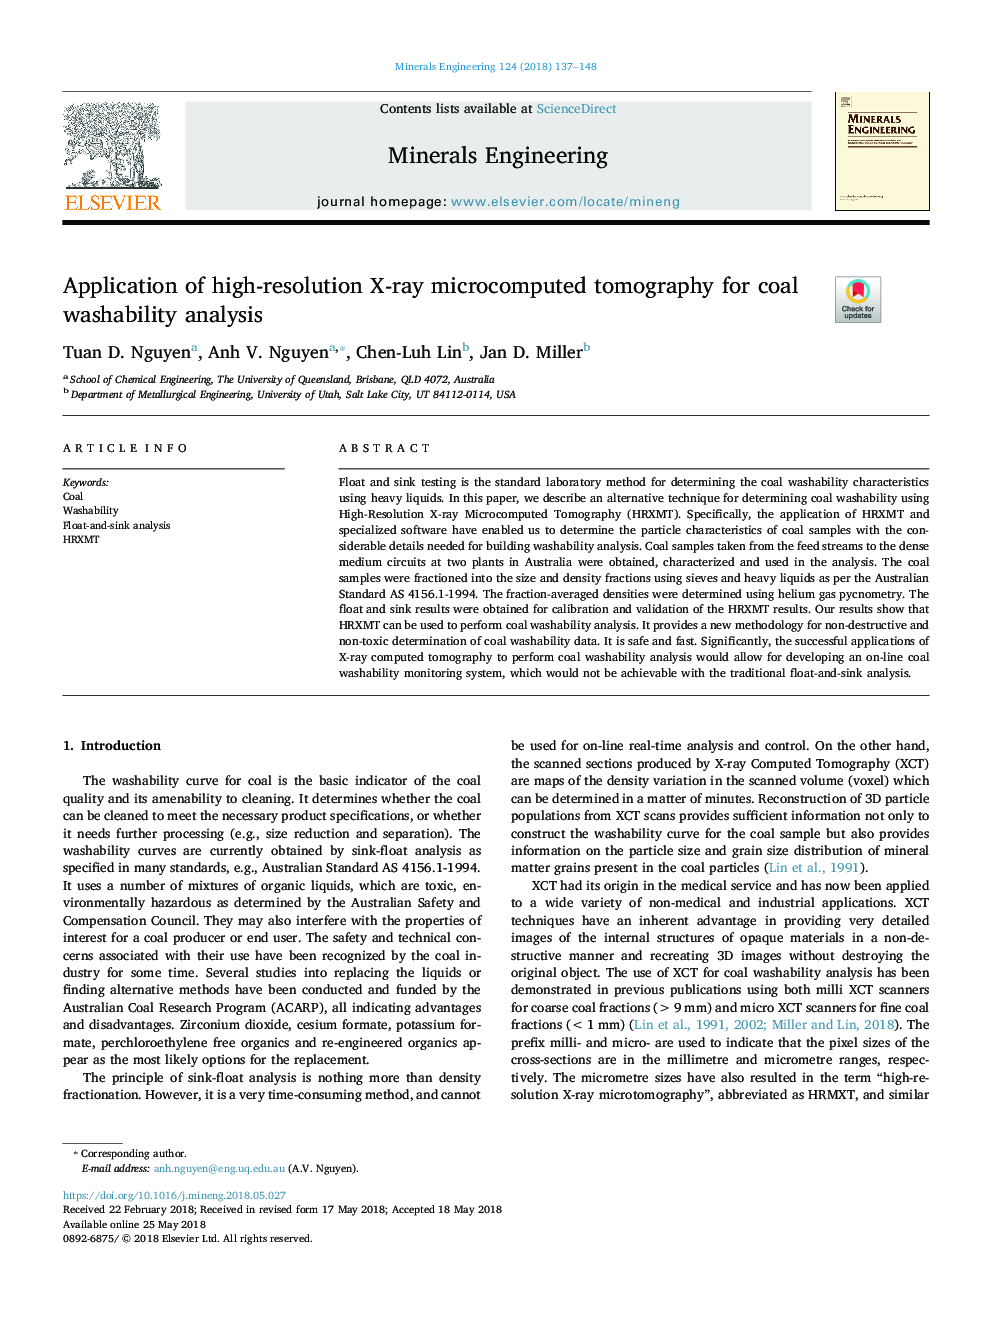 Application of high-resolution X-ray microcomputed tomography for coal washability analysis